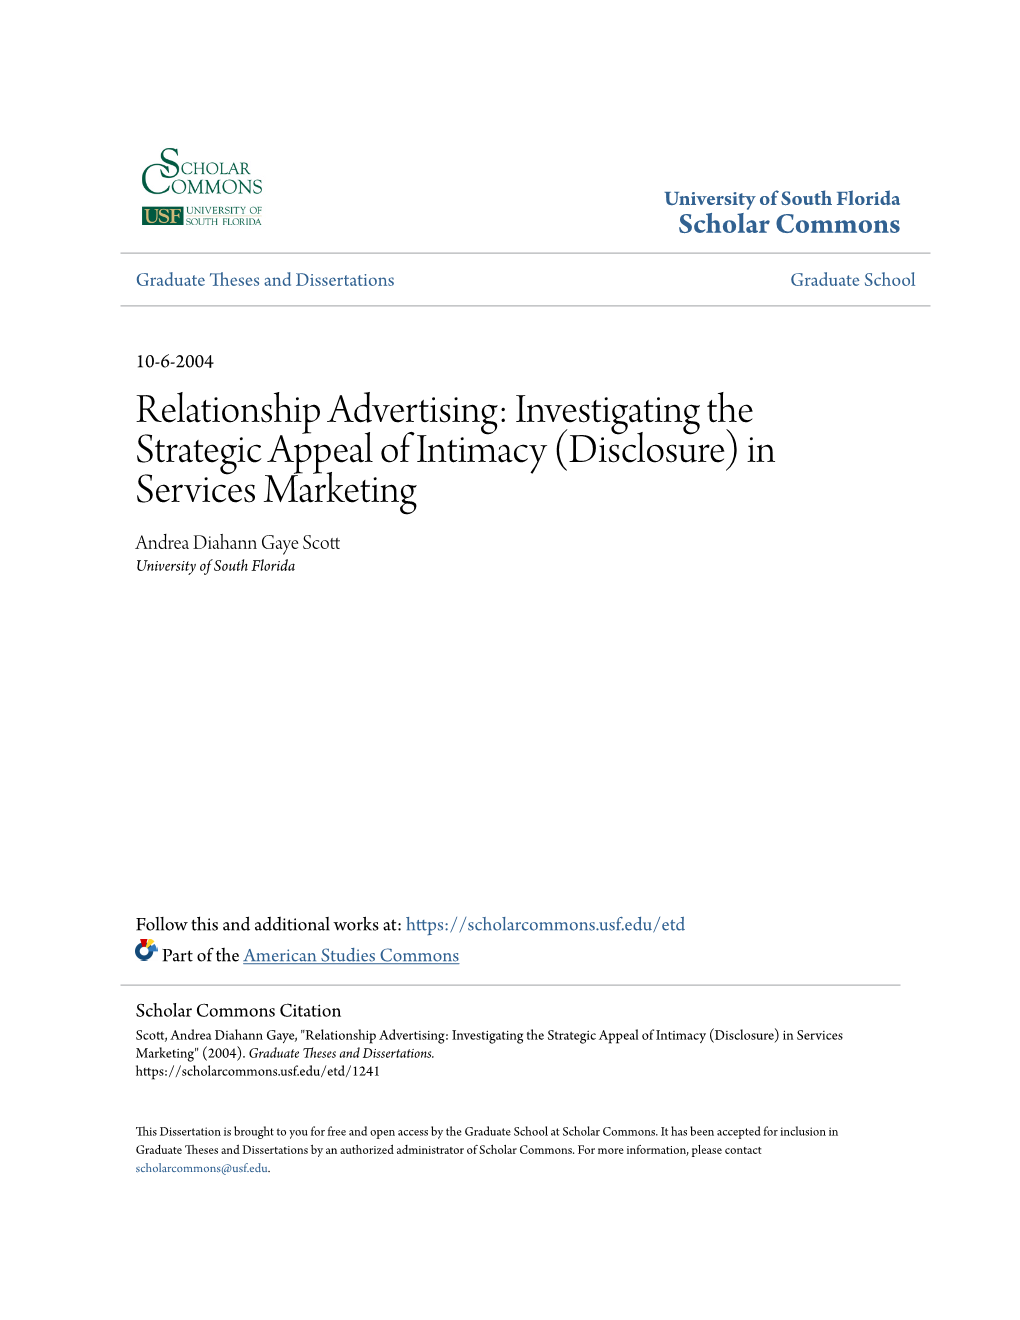 Relationship Advertising: Investigating the Strategic Appeal of Intimacy (Disclosure) in Services Marketing Andrea Diahann Gaye Scott University of South Florida